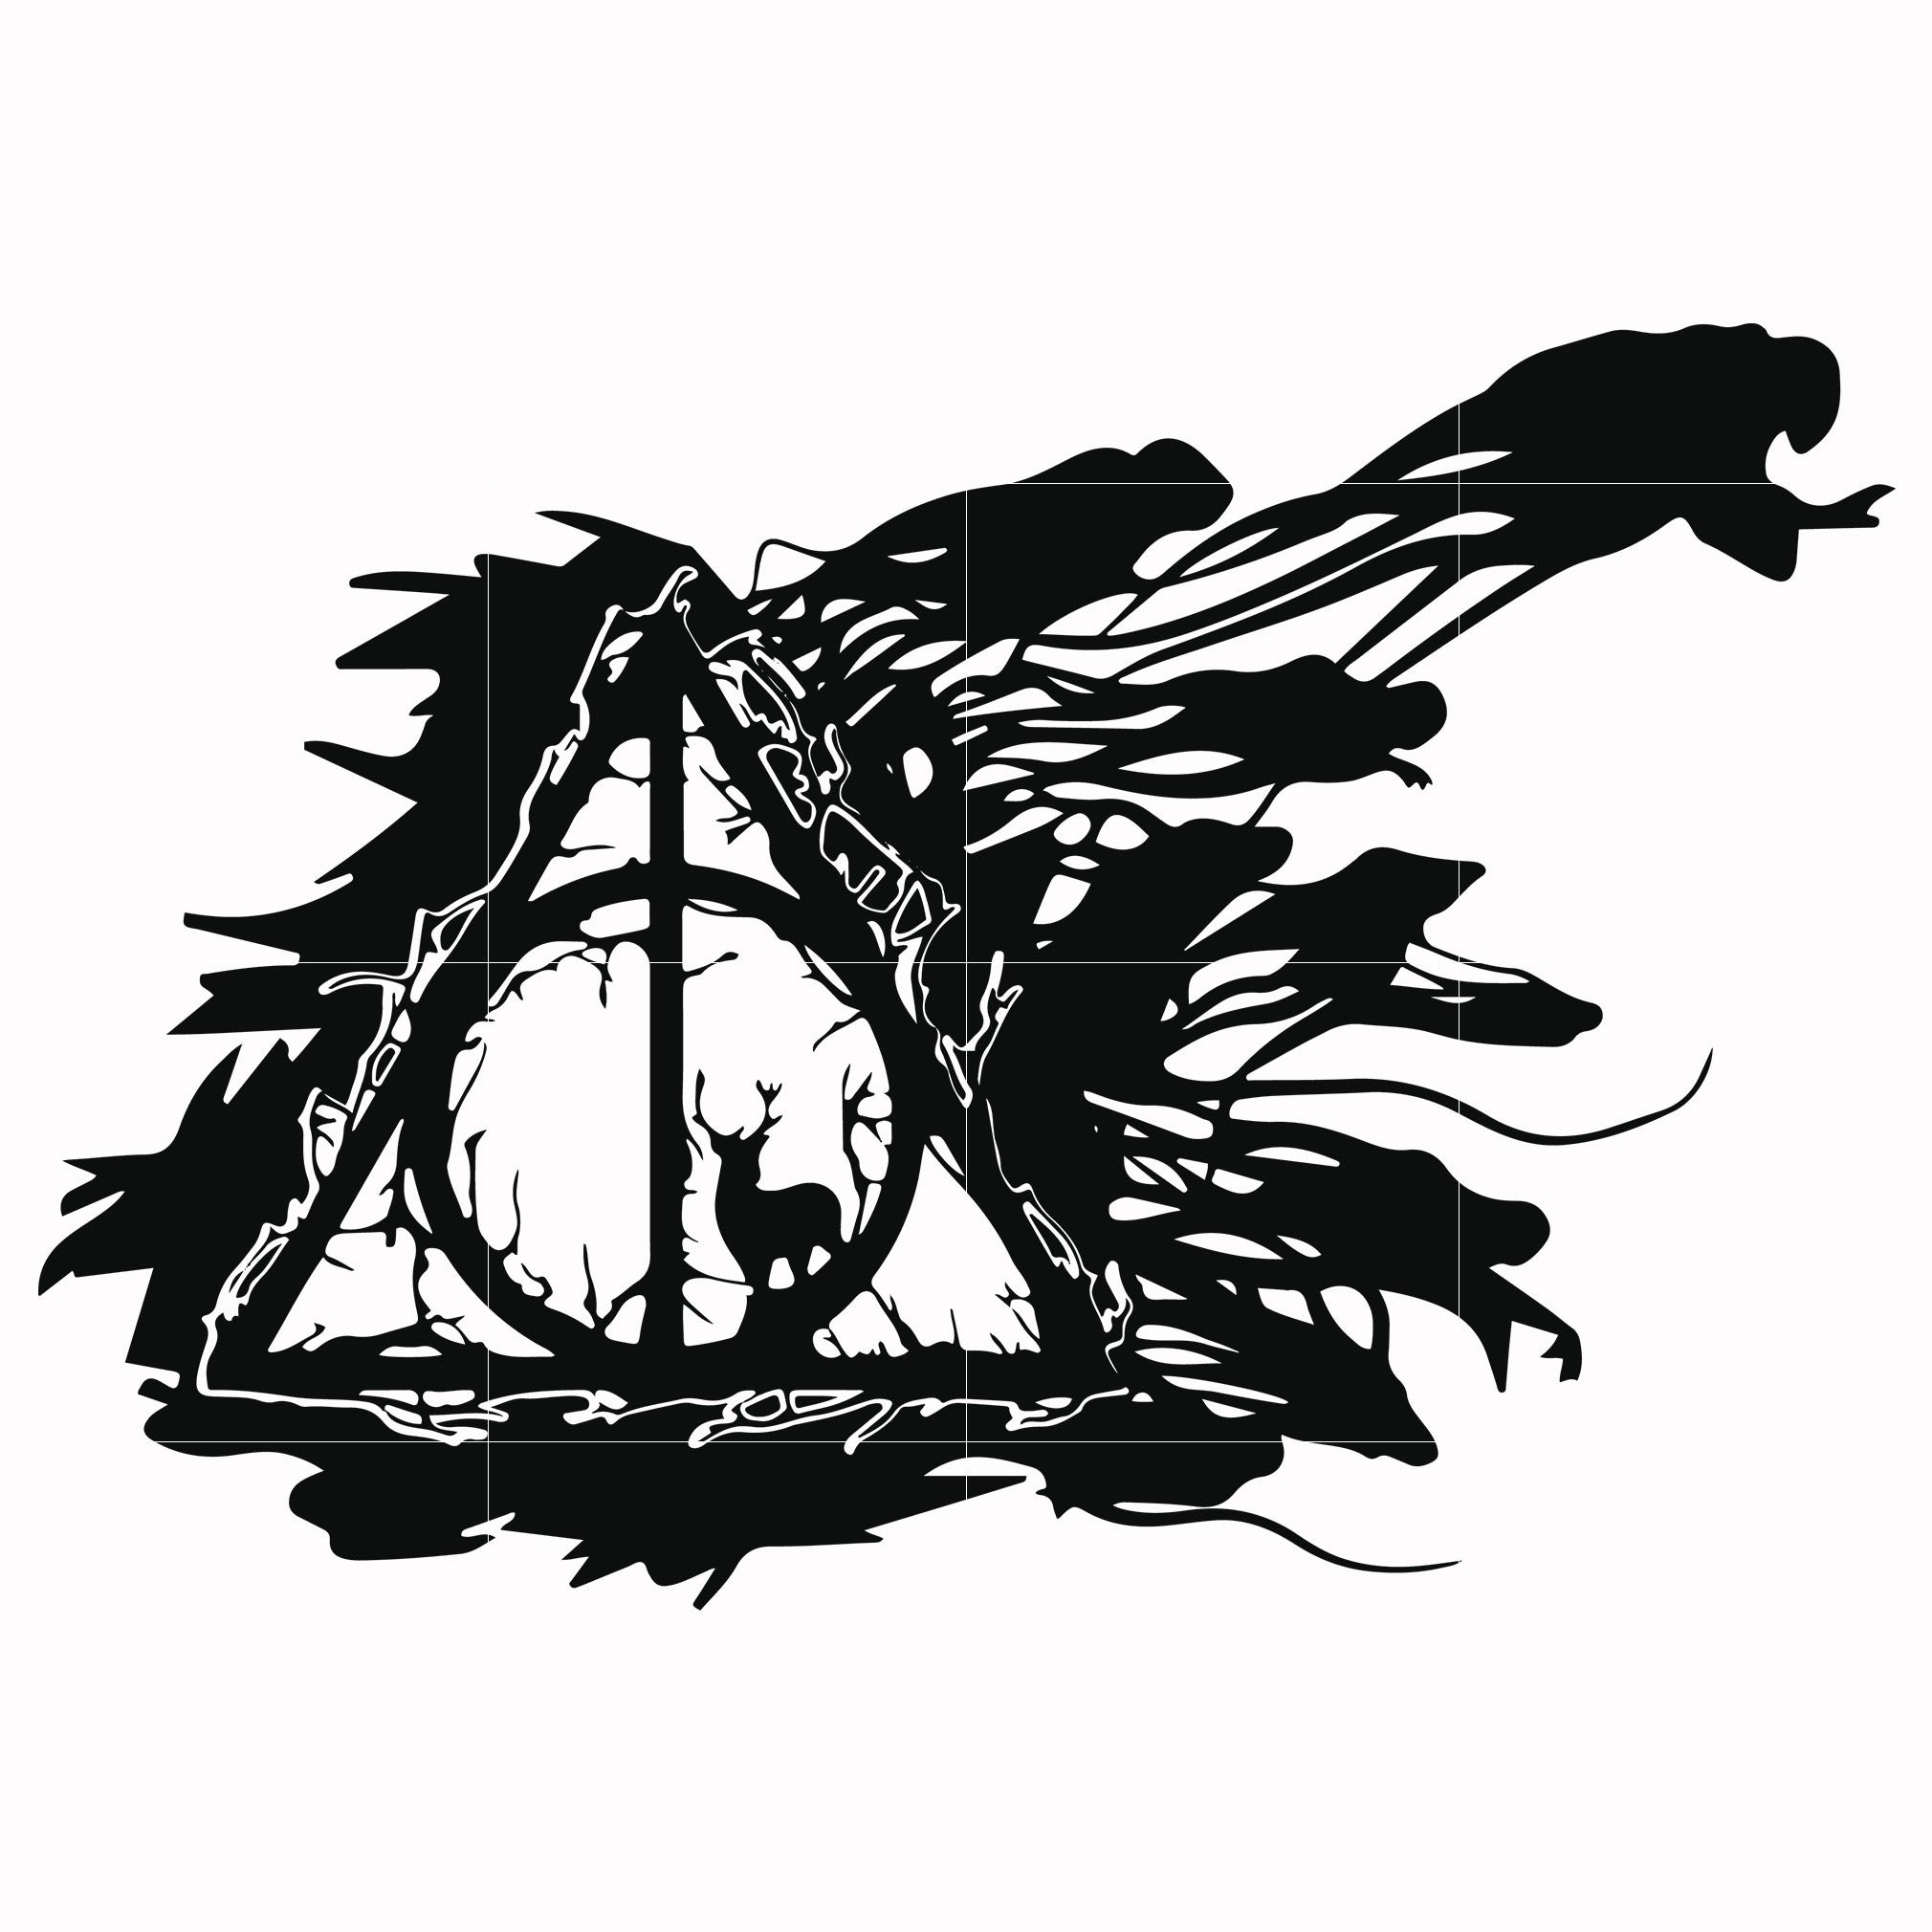 Download Harry potter deathy hallows shadowhunter svg, harry potter ...